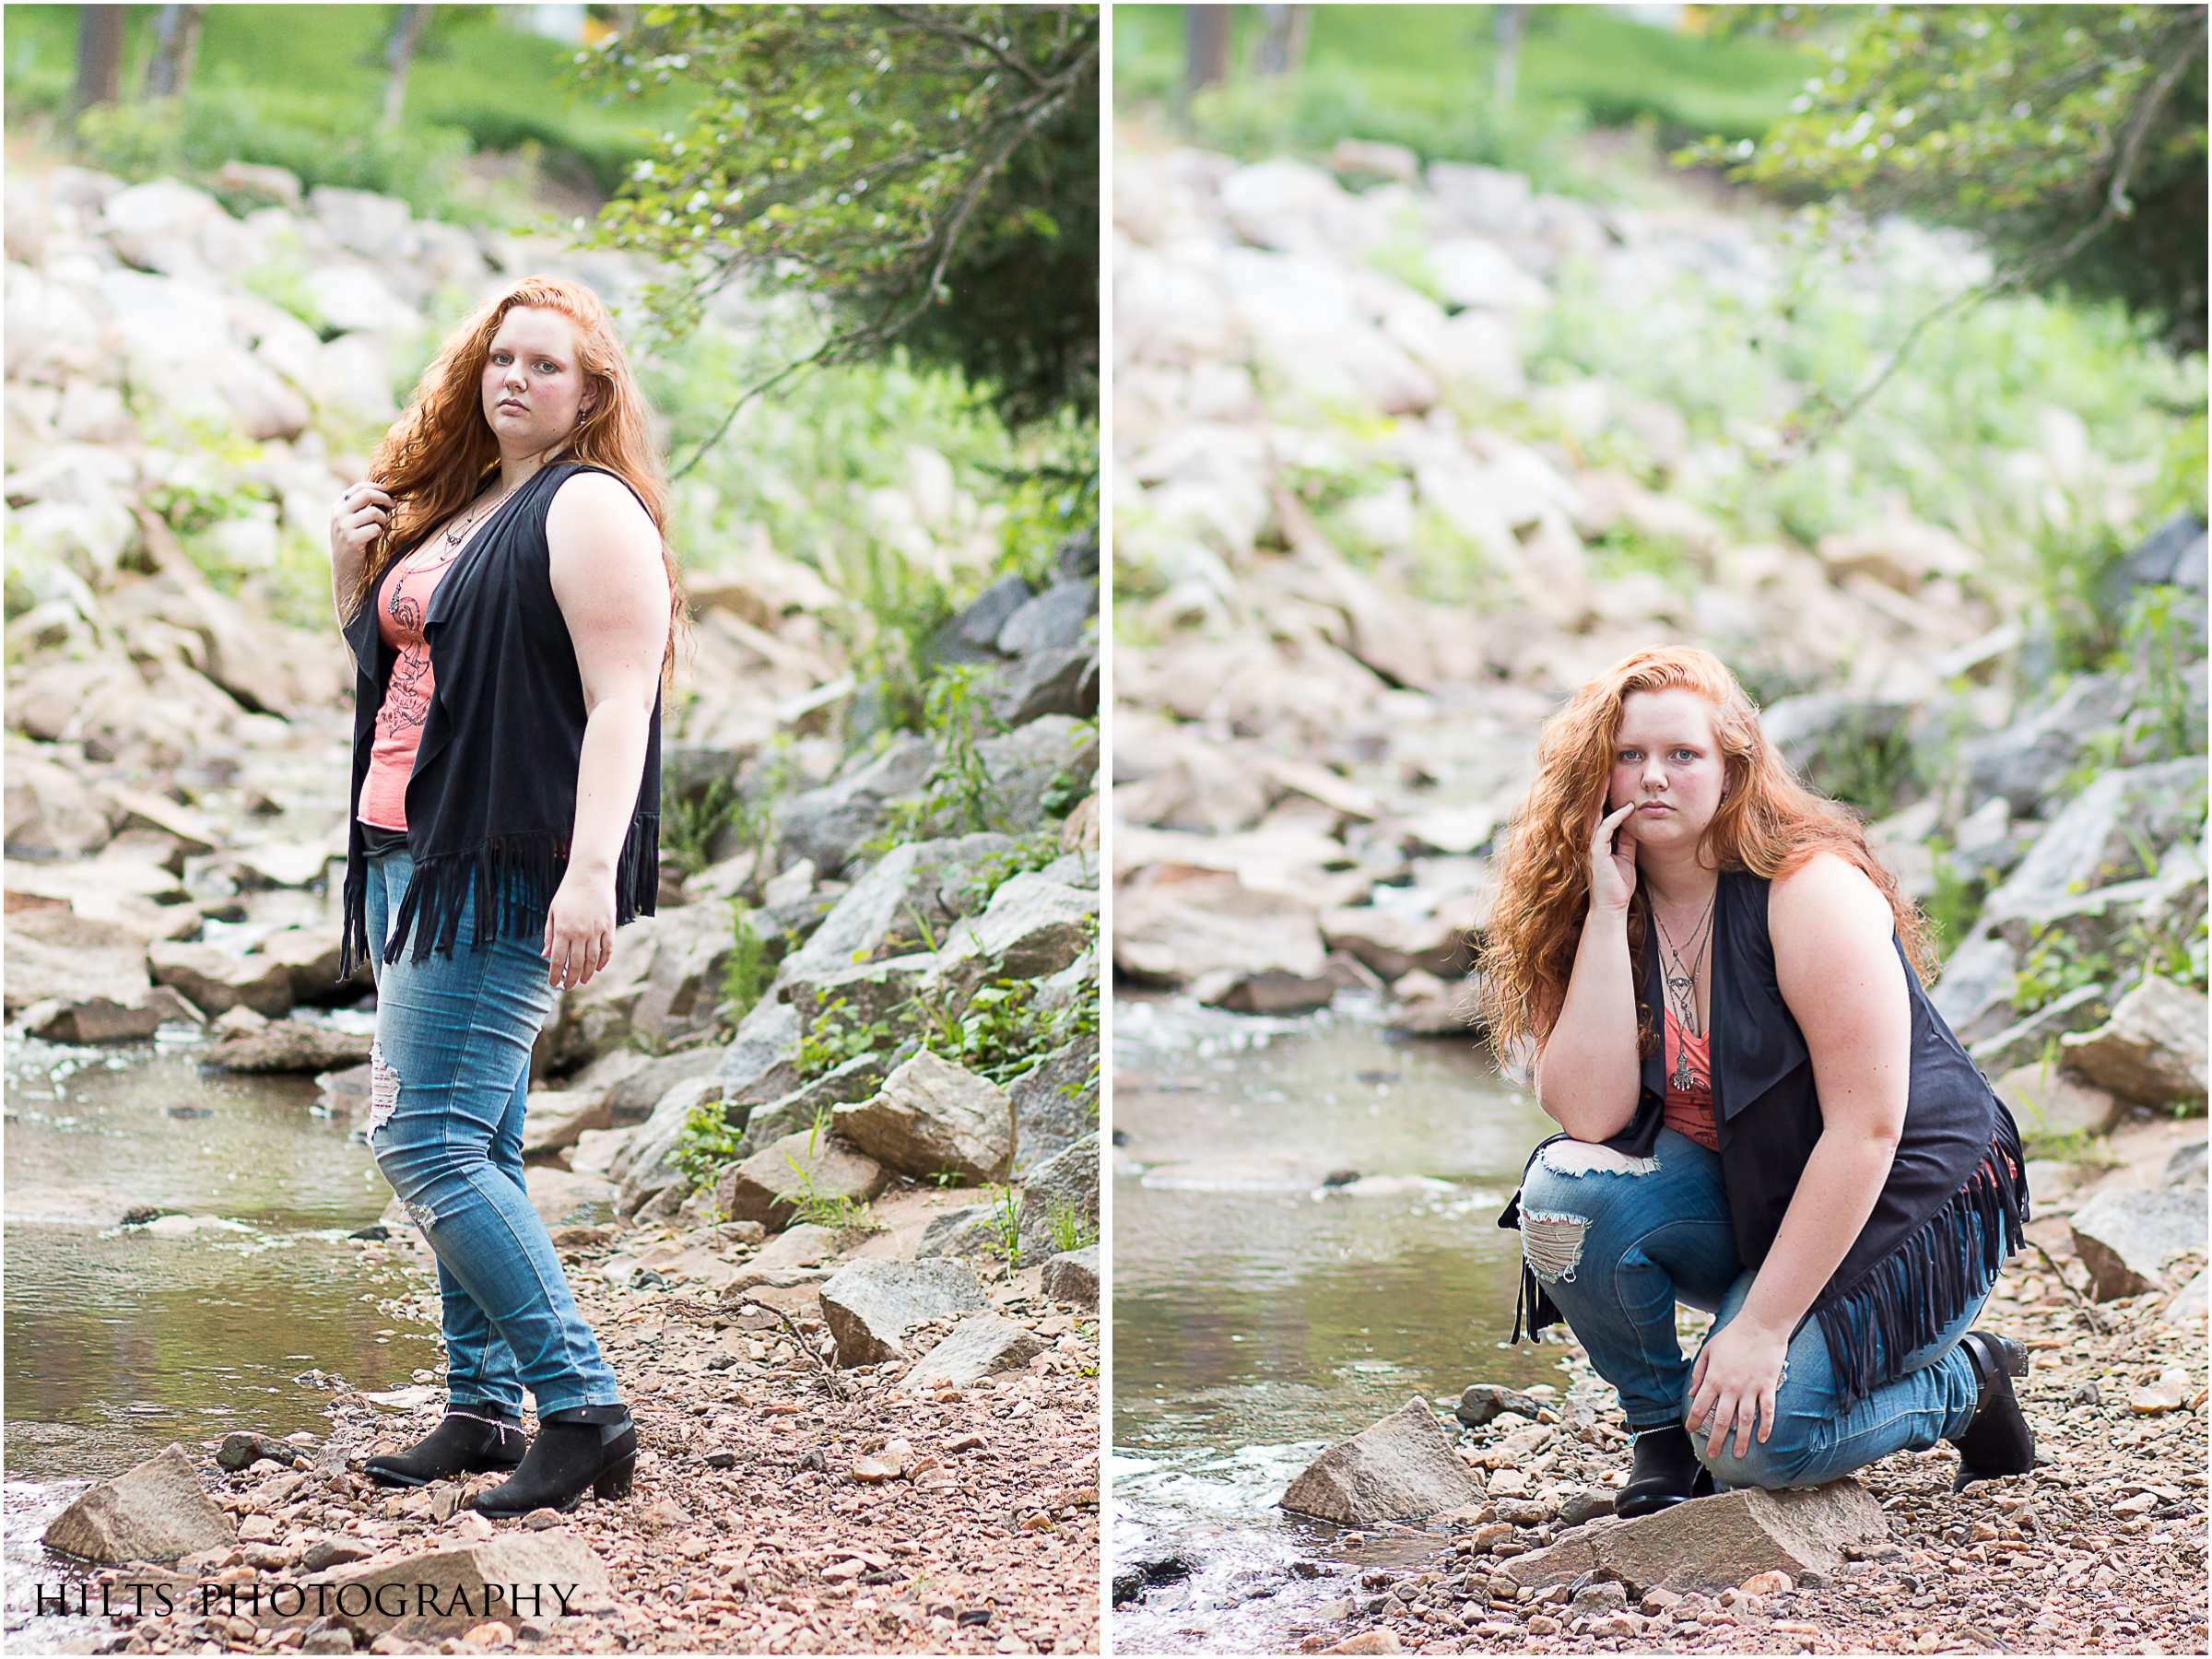 Hilts Photography Raleigh Senior Session -15